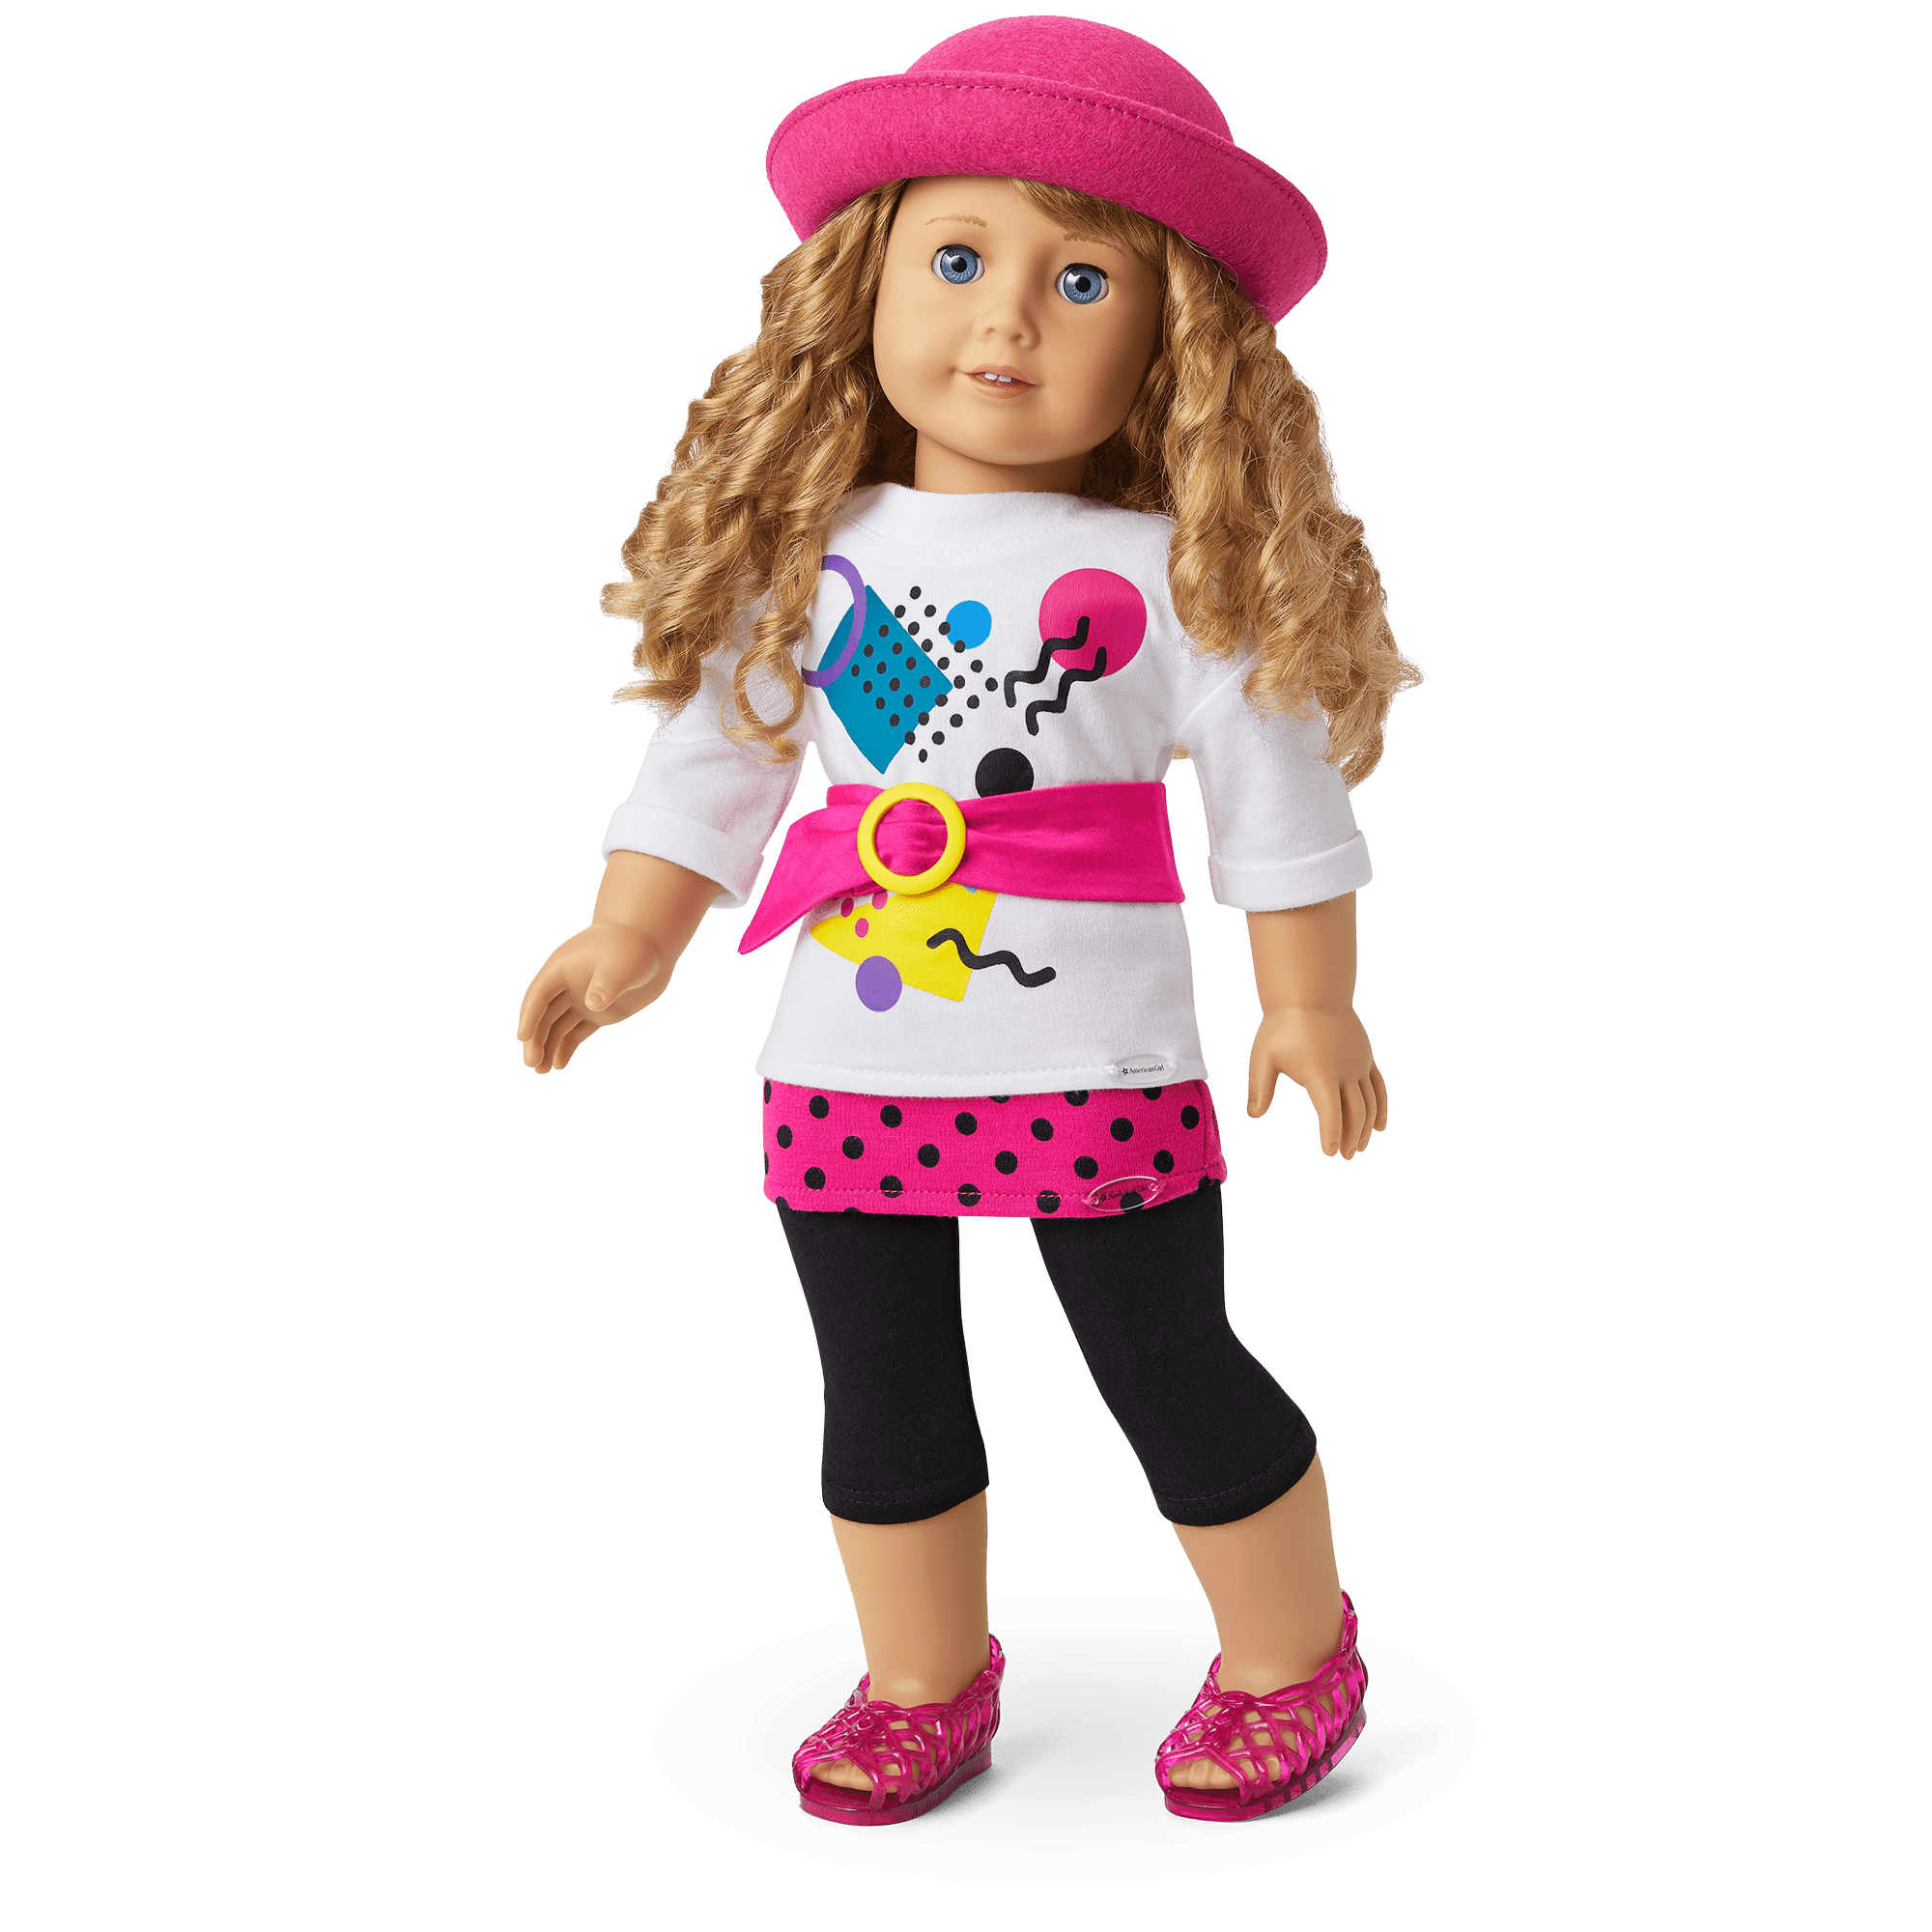 Courtney’s™ Awesome Accessories for 18-inch Dolls